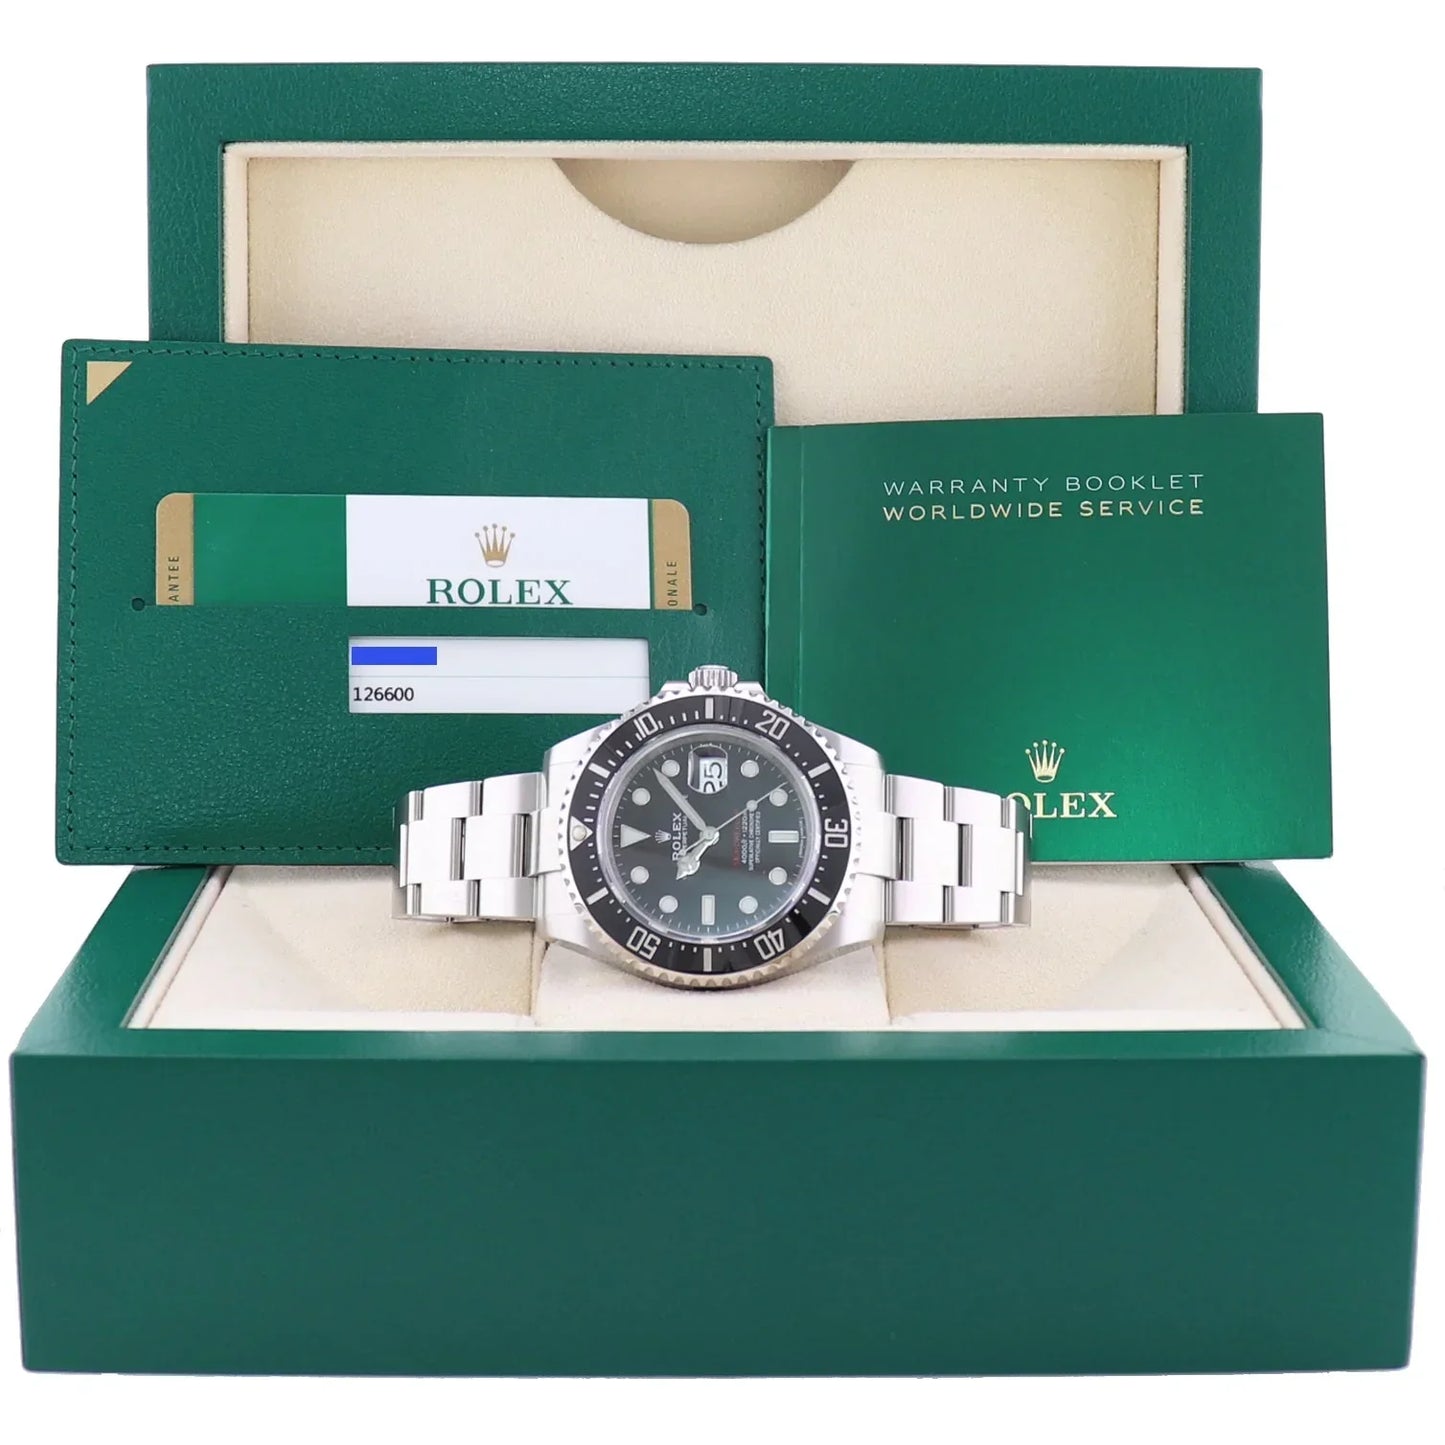 2019 MINT PAPERS Rolex Red Seadweller SD43 126600 43mm Mark 1 Mk1 Watch Box